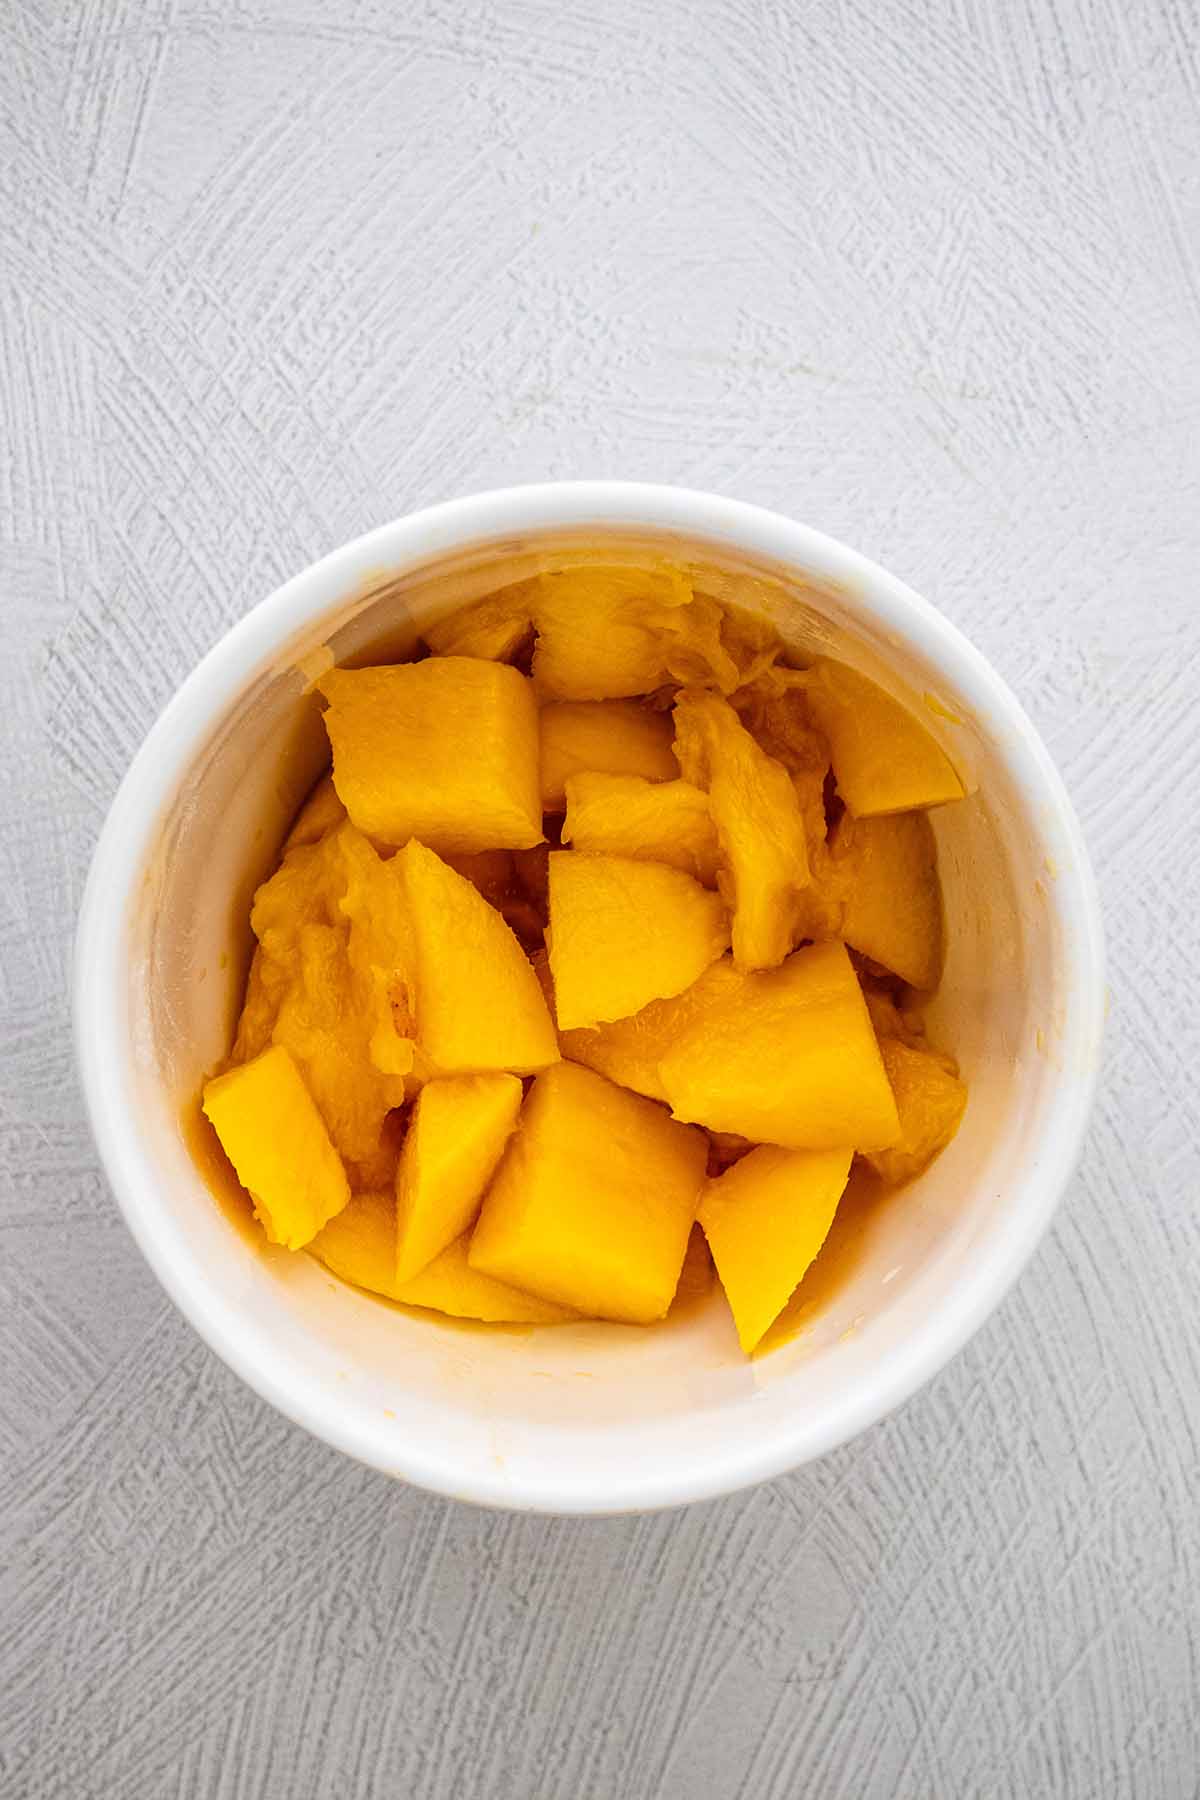 Peeled, pitted, and chopped mango in a white ceramic bowl